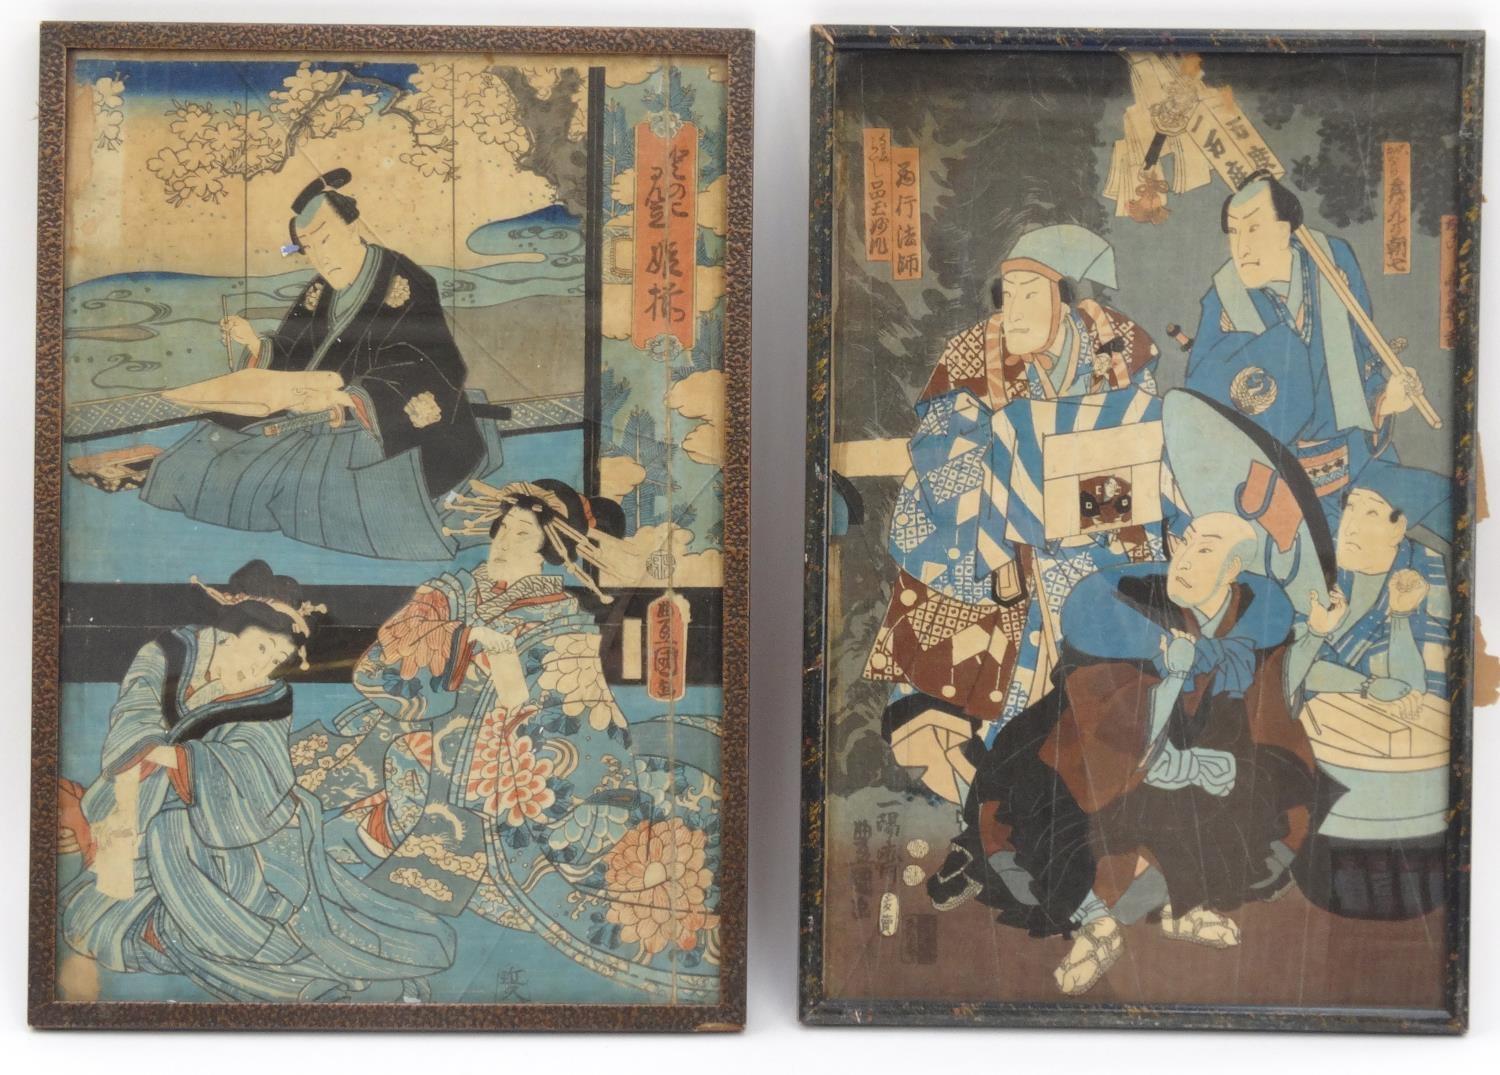 Two Japanese woodblock prints - one of warriors, the other of three geisha girls, both with